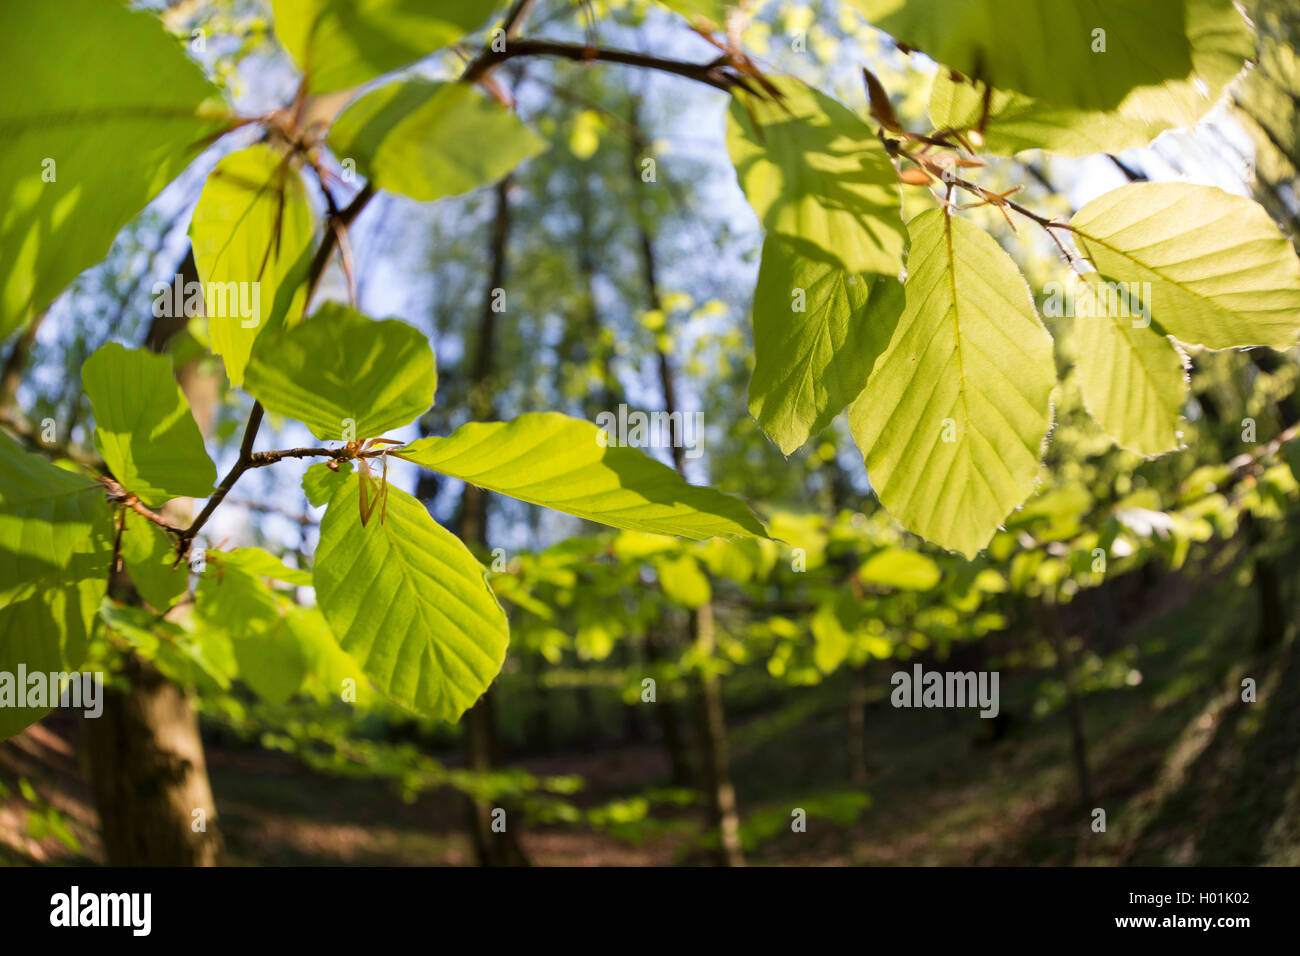 common beech (Fagus sylvatica), young leaves iun backlight, Germany Stock Photo